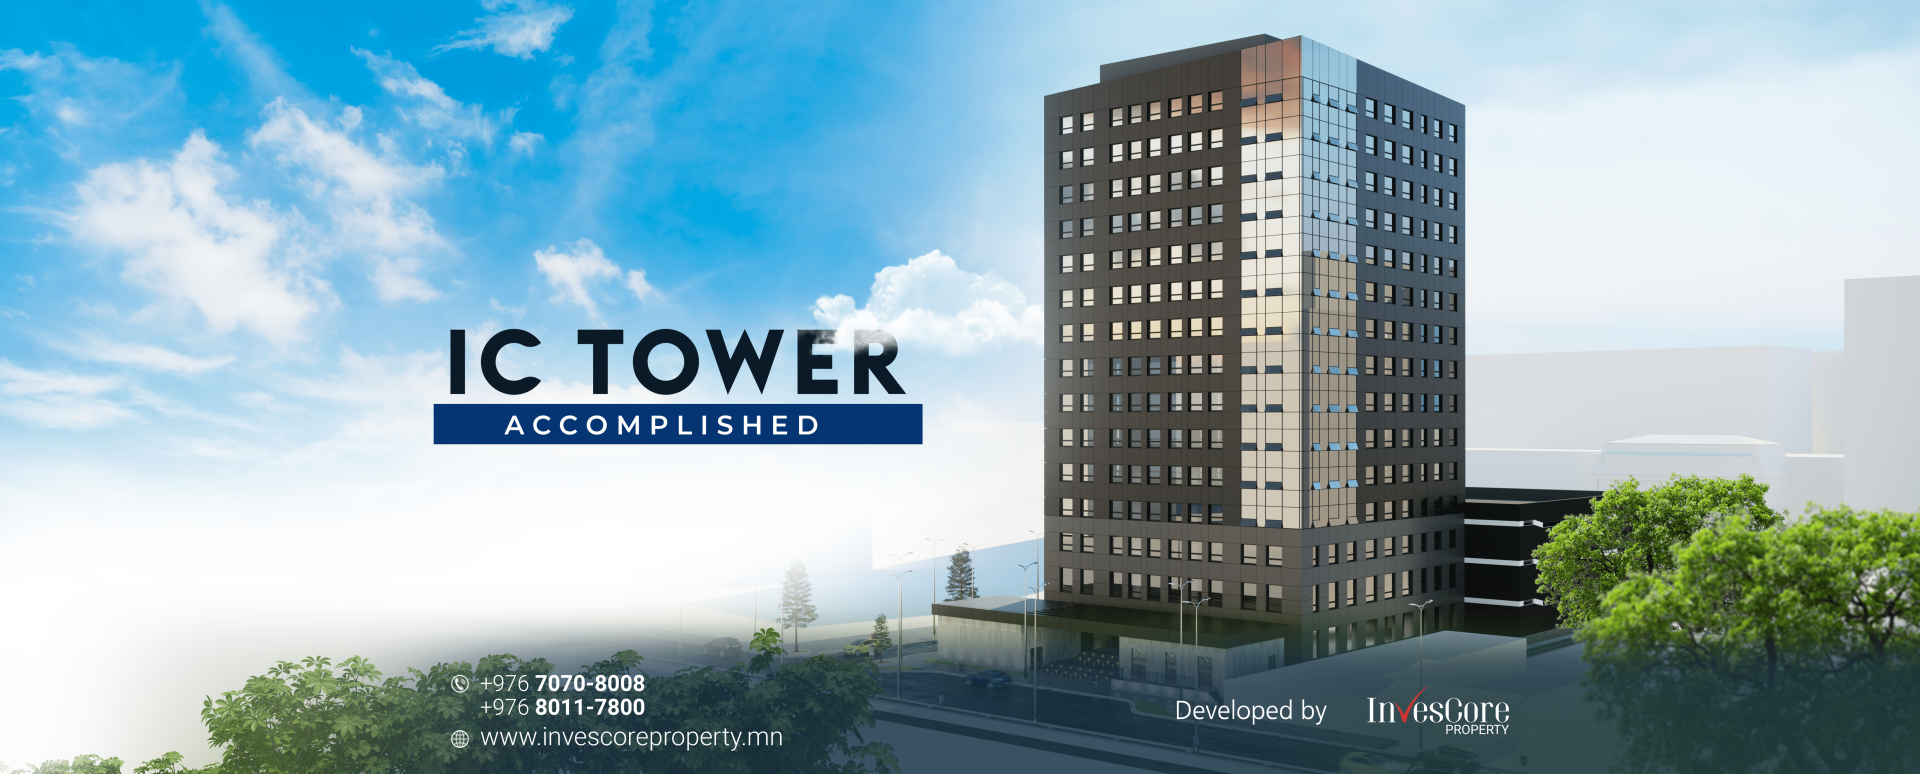 NEW PROJECT: IC Tower